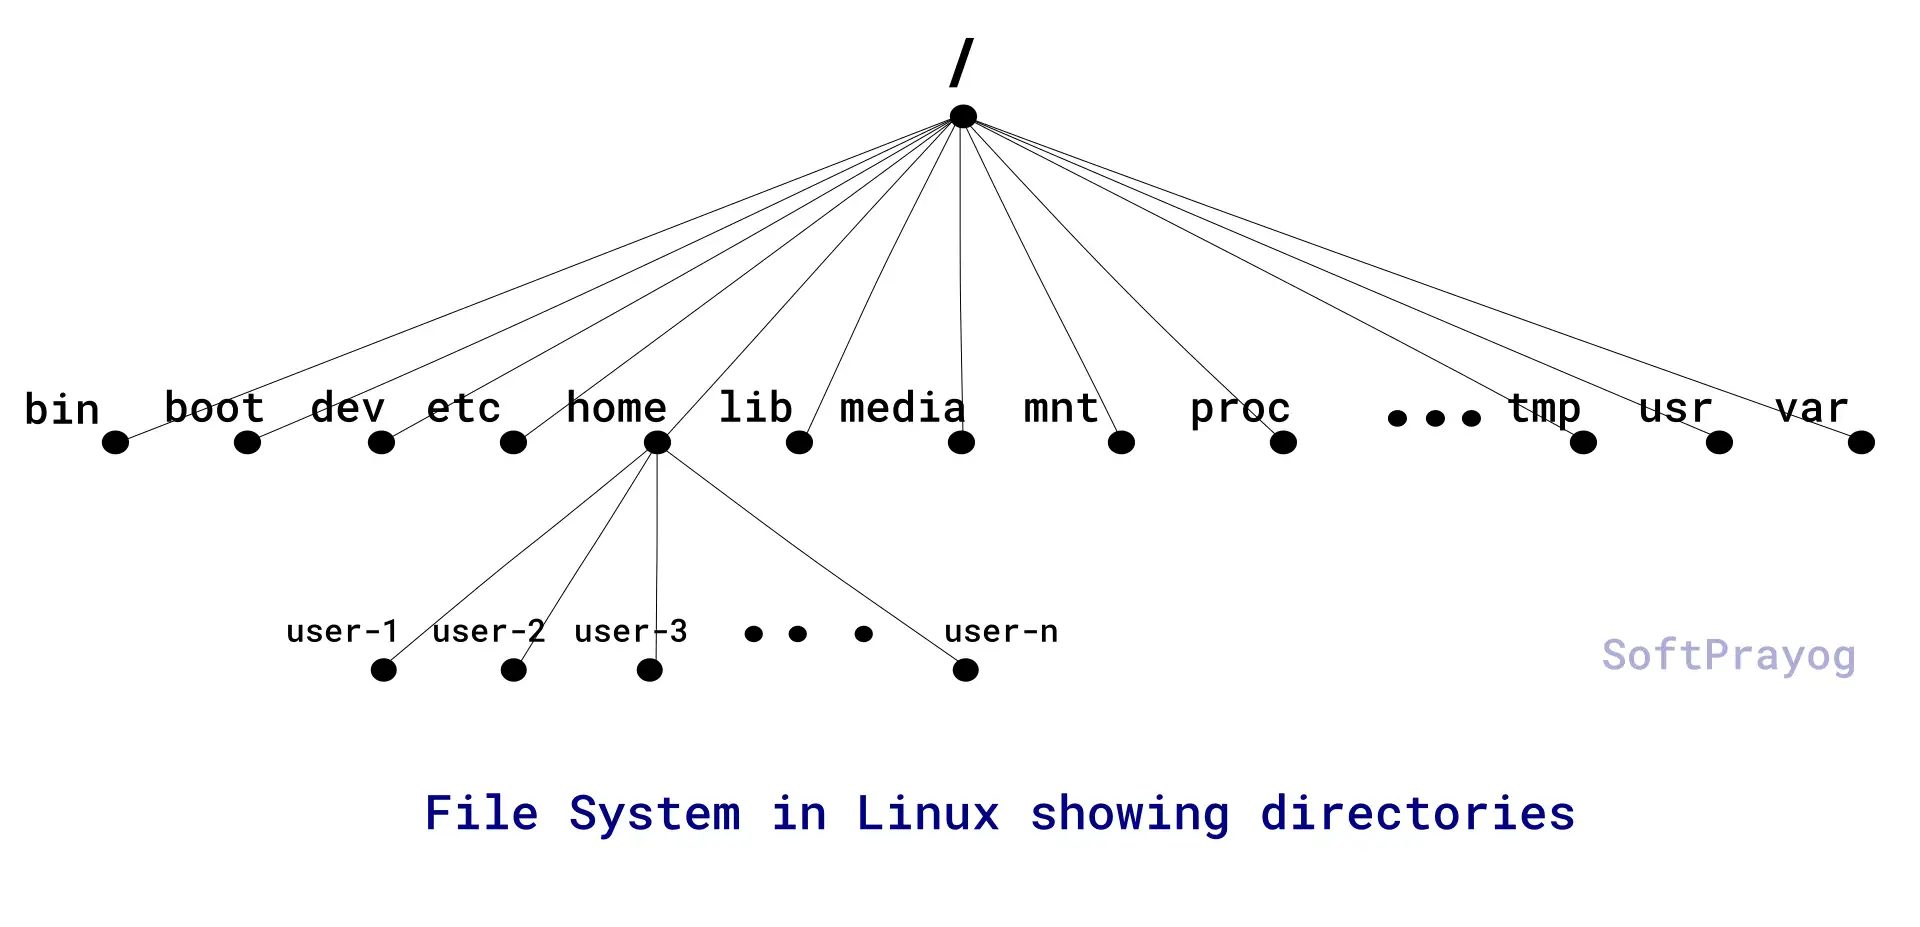 File system in Linux showing directories